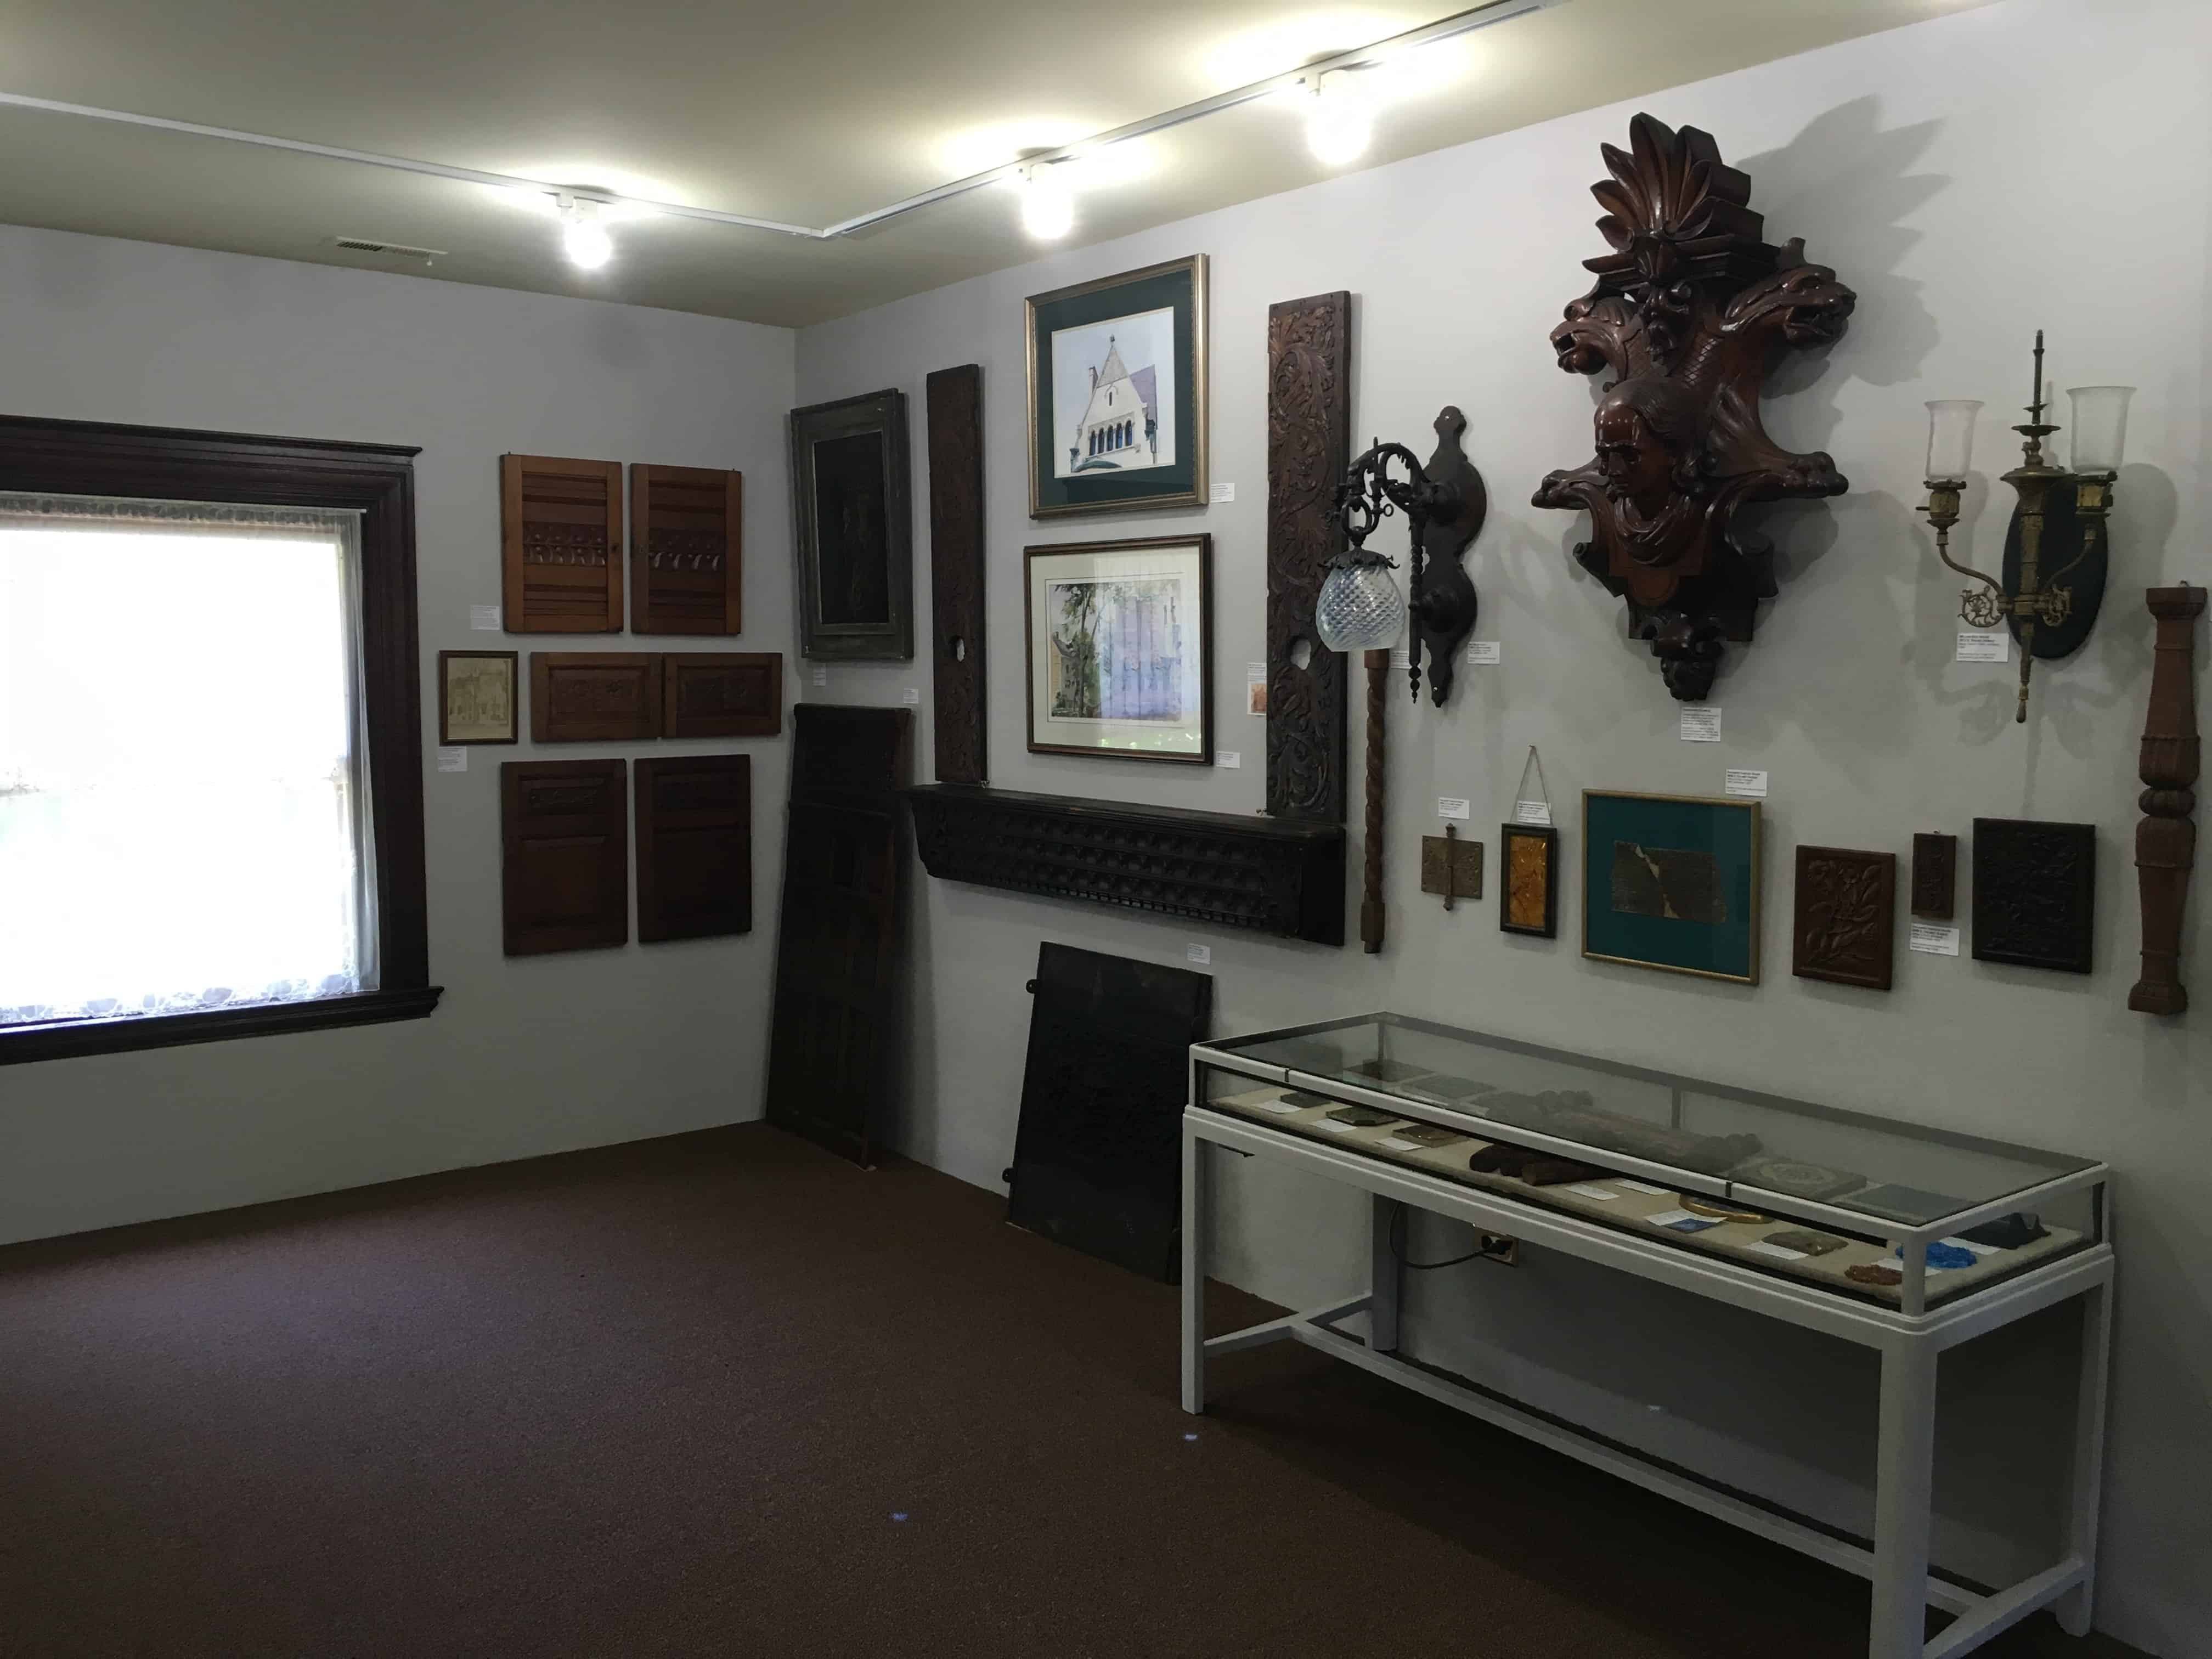 Simmerling Gallery at the John J. Glessner House in Chicago, Illinois